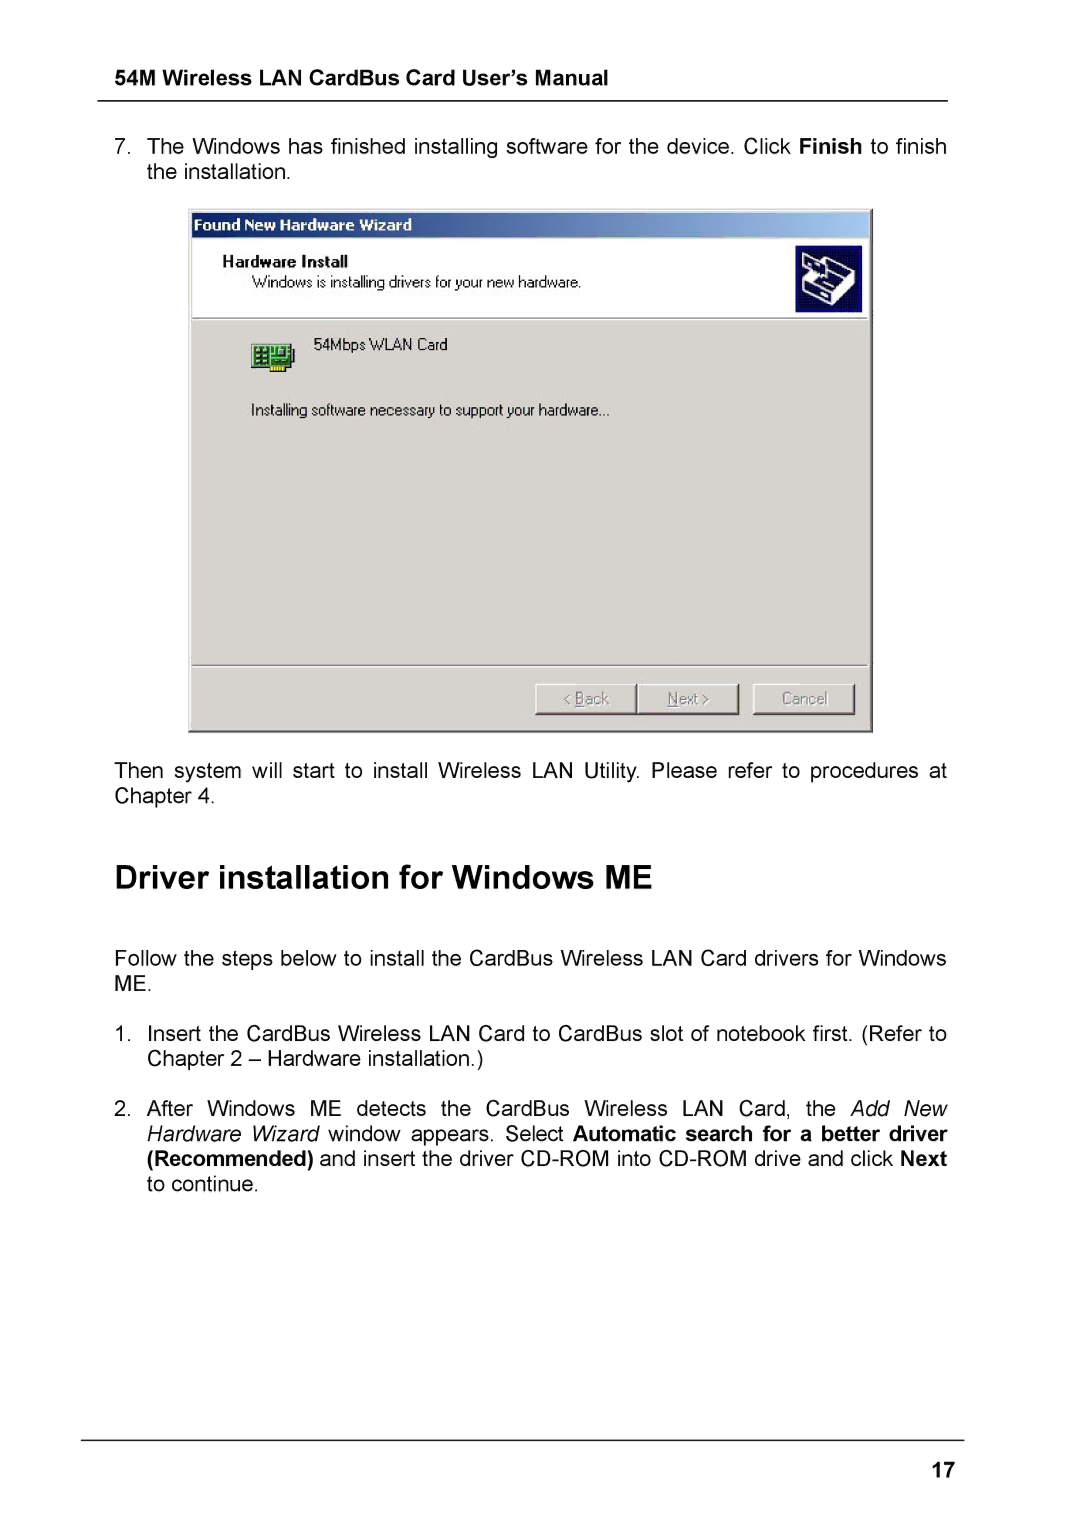 Boca Research 54M user manual Driver installation for Windows ME 